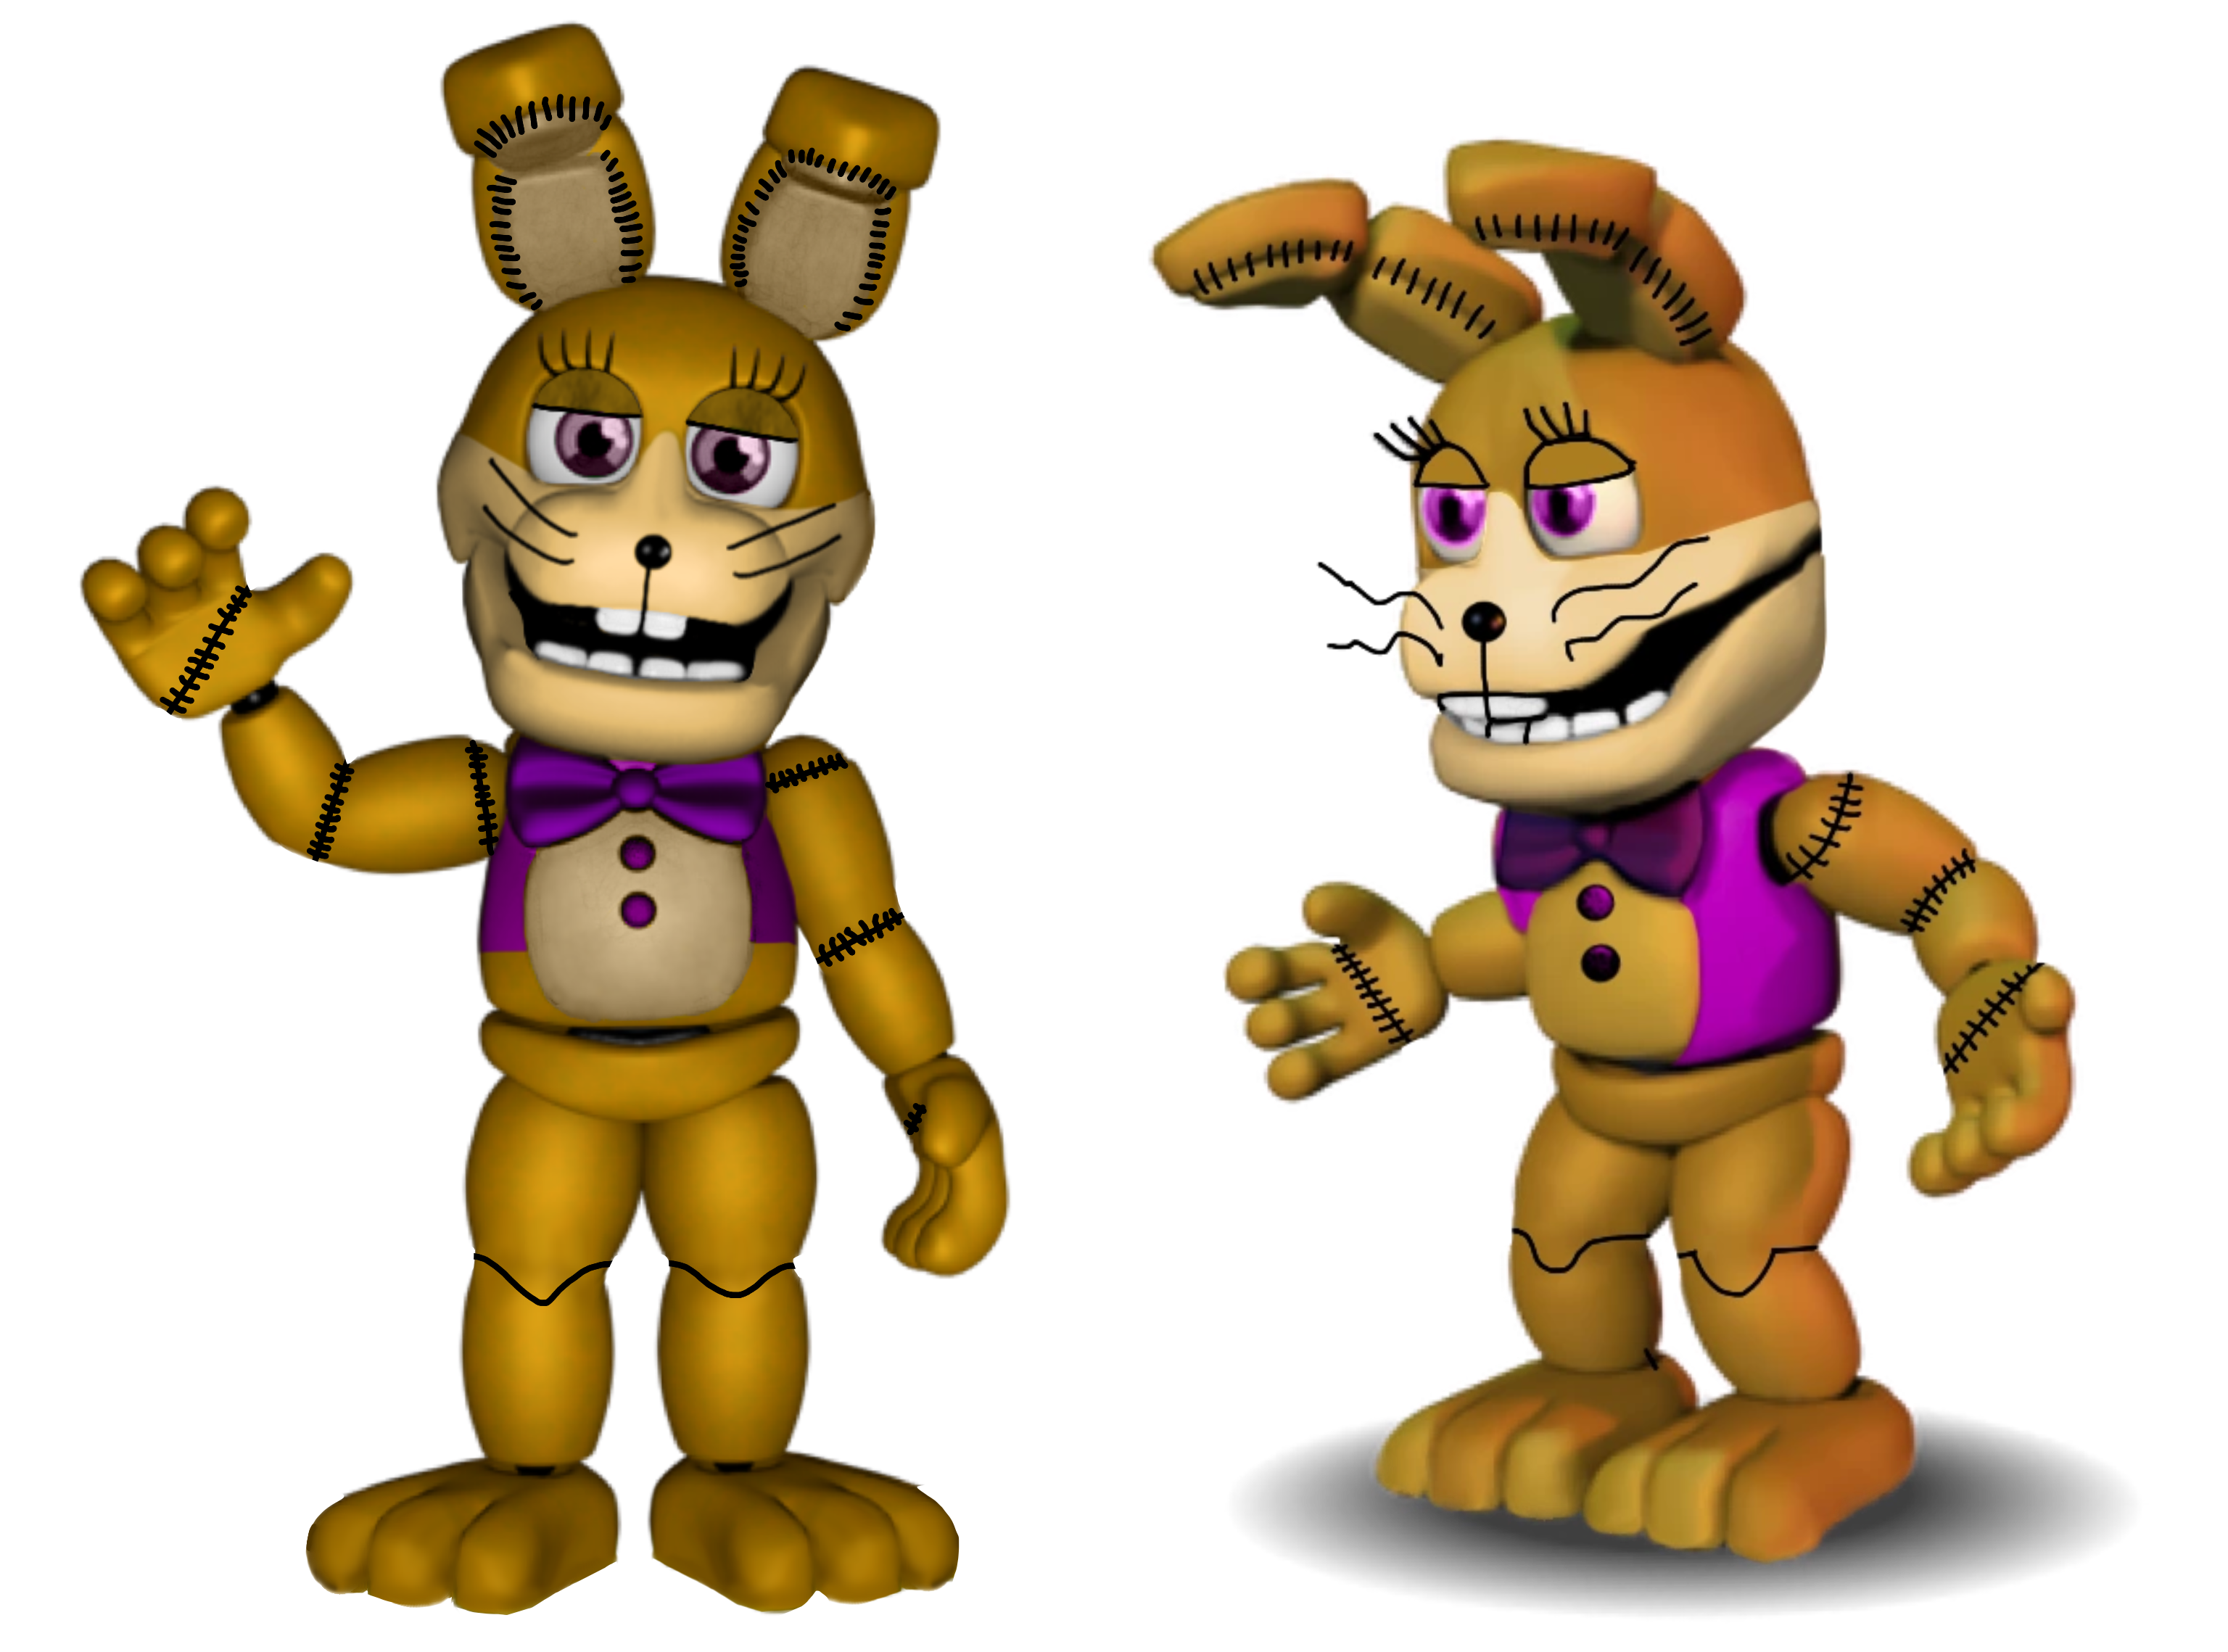 Vanny and Glitchtrap FNaF AR Animations 